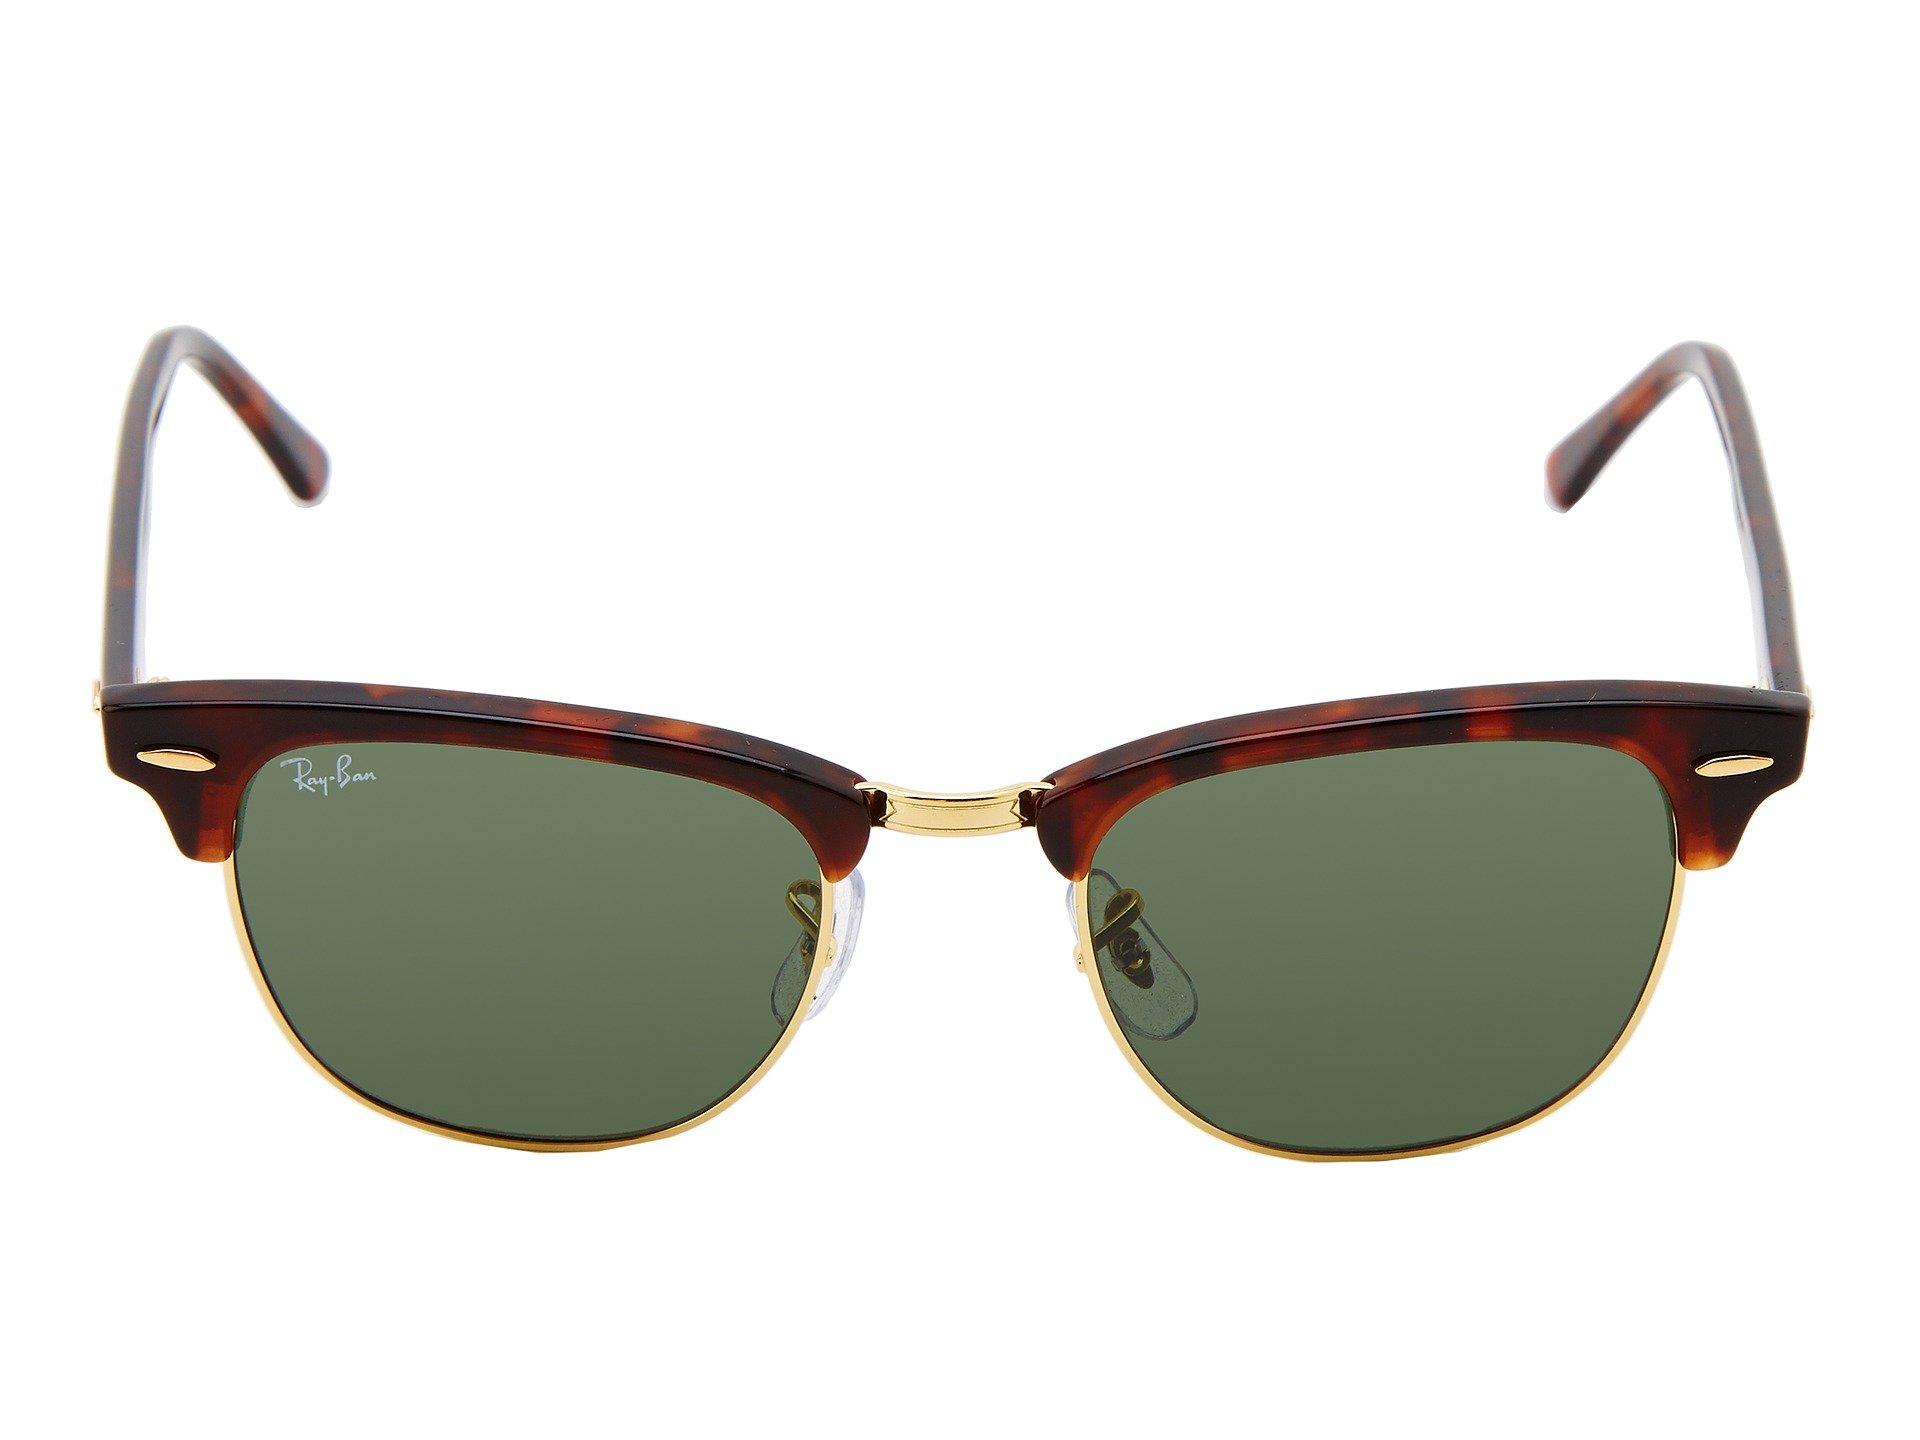 Ray-Ban Rb3016 Clubmaster Sunglasses 51mm in Dark Tortoise (Brown) - Lyst